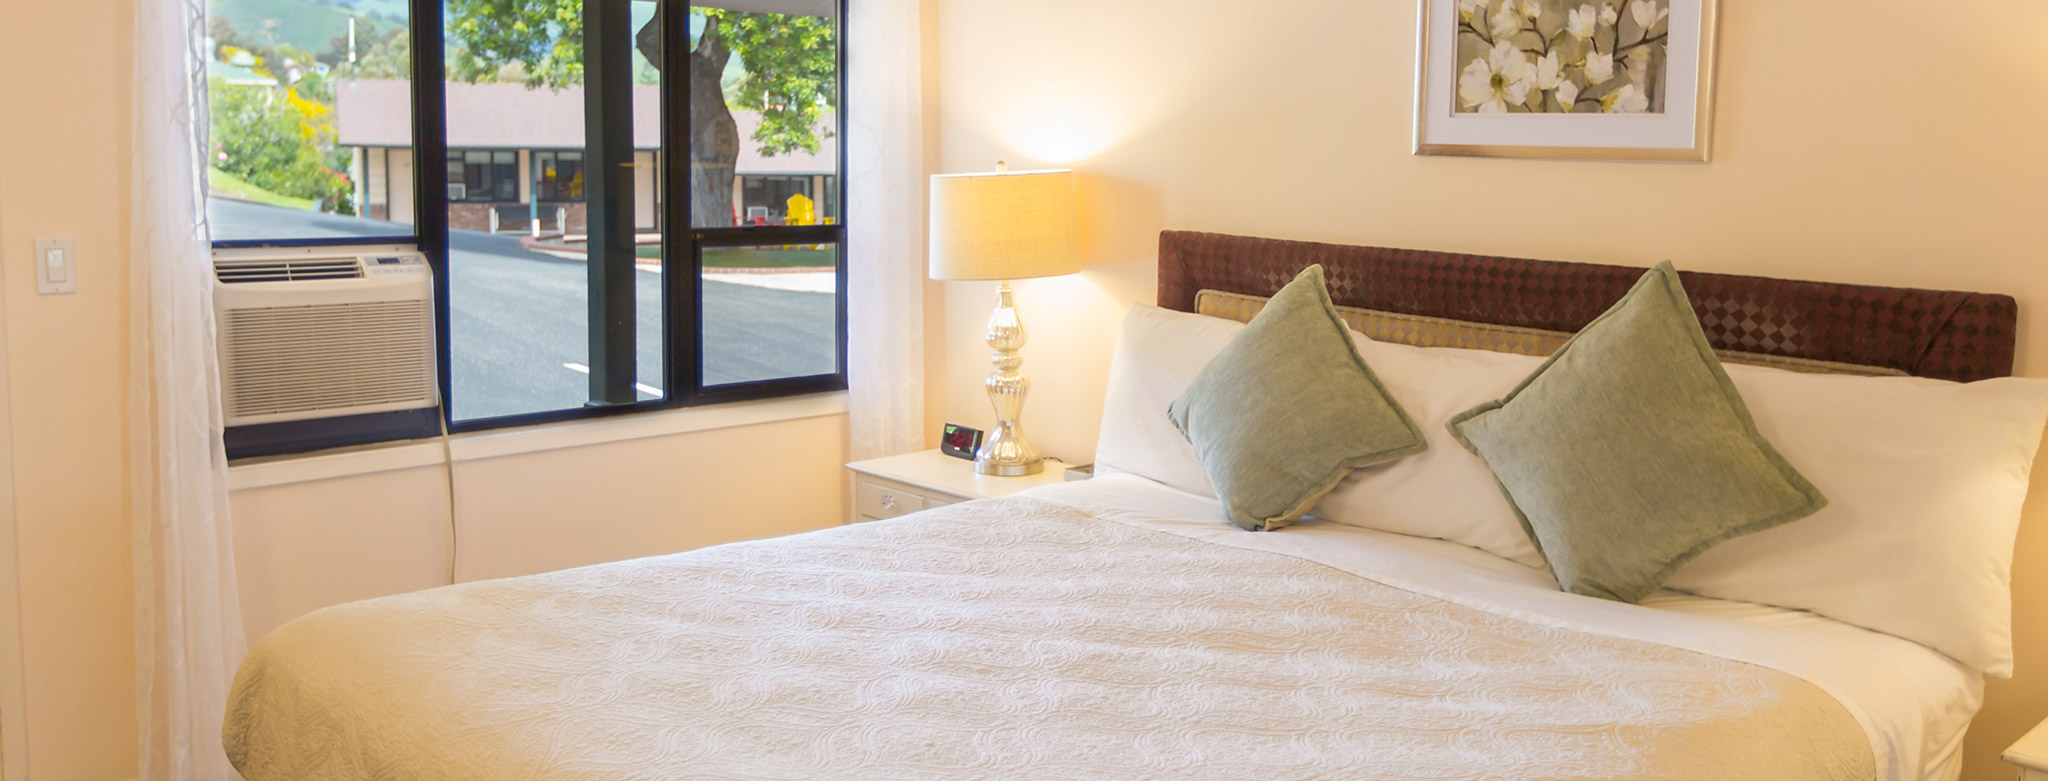 Comfortable beds in finely appointed rooms.